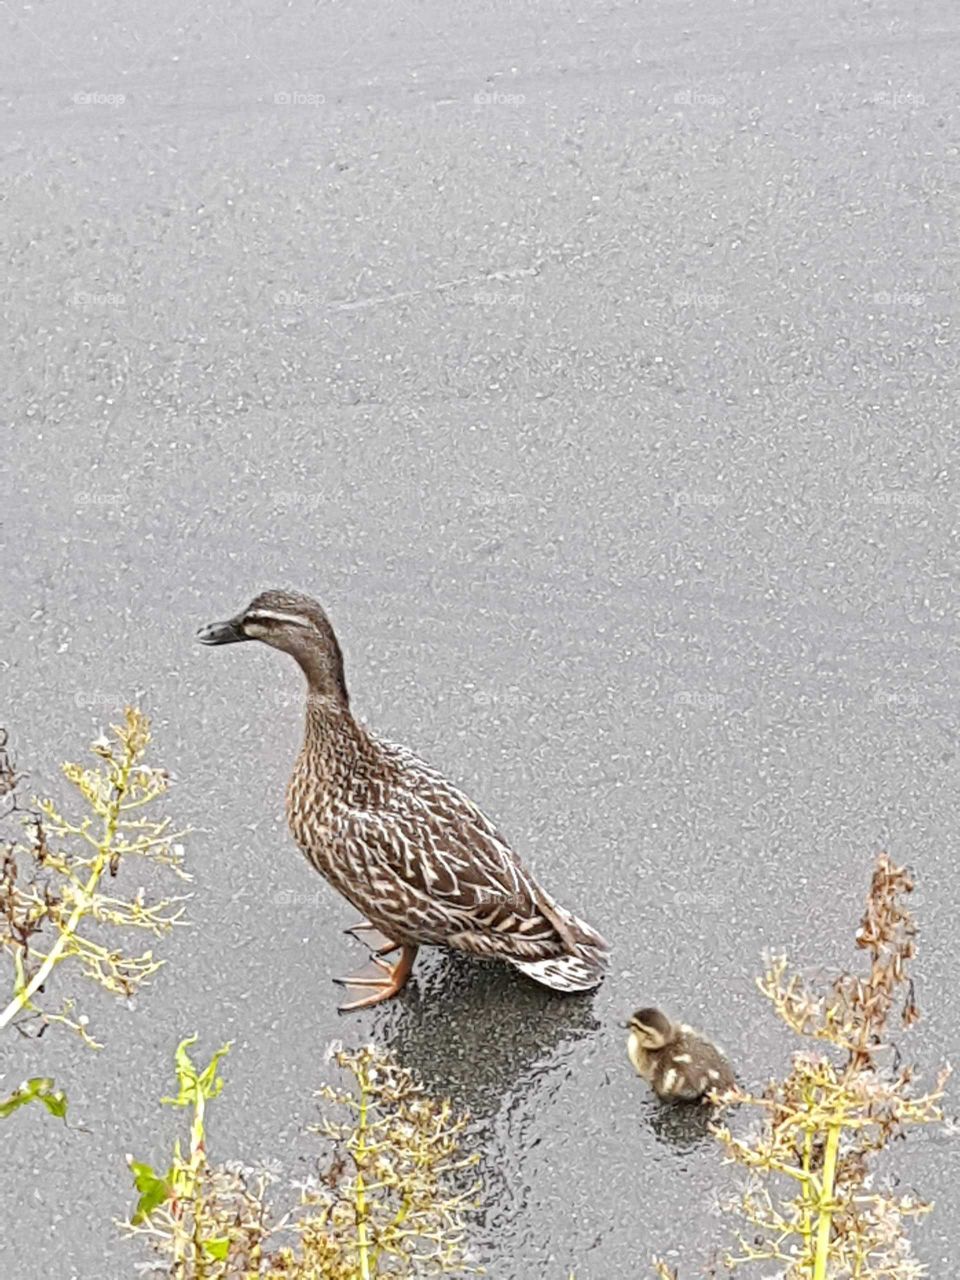 Mother duck and her baby walking down our street on a wet day.